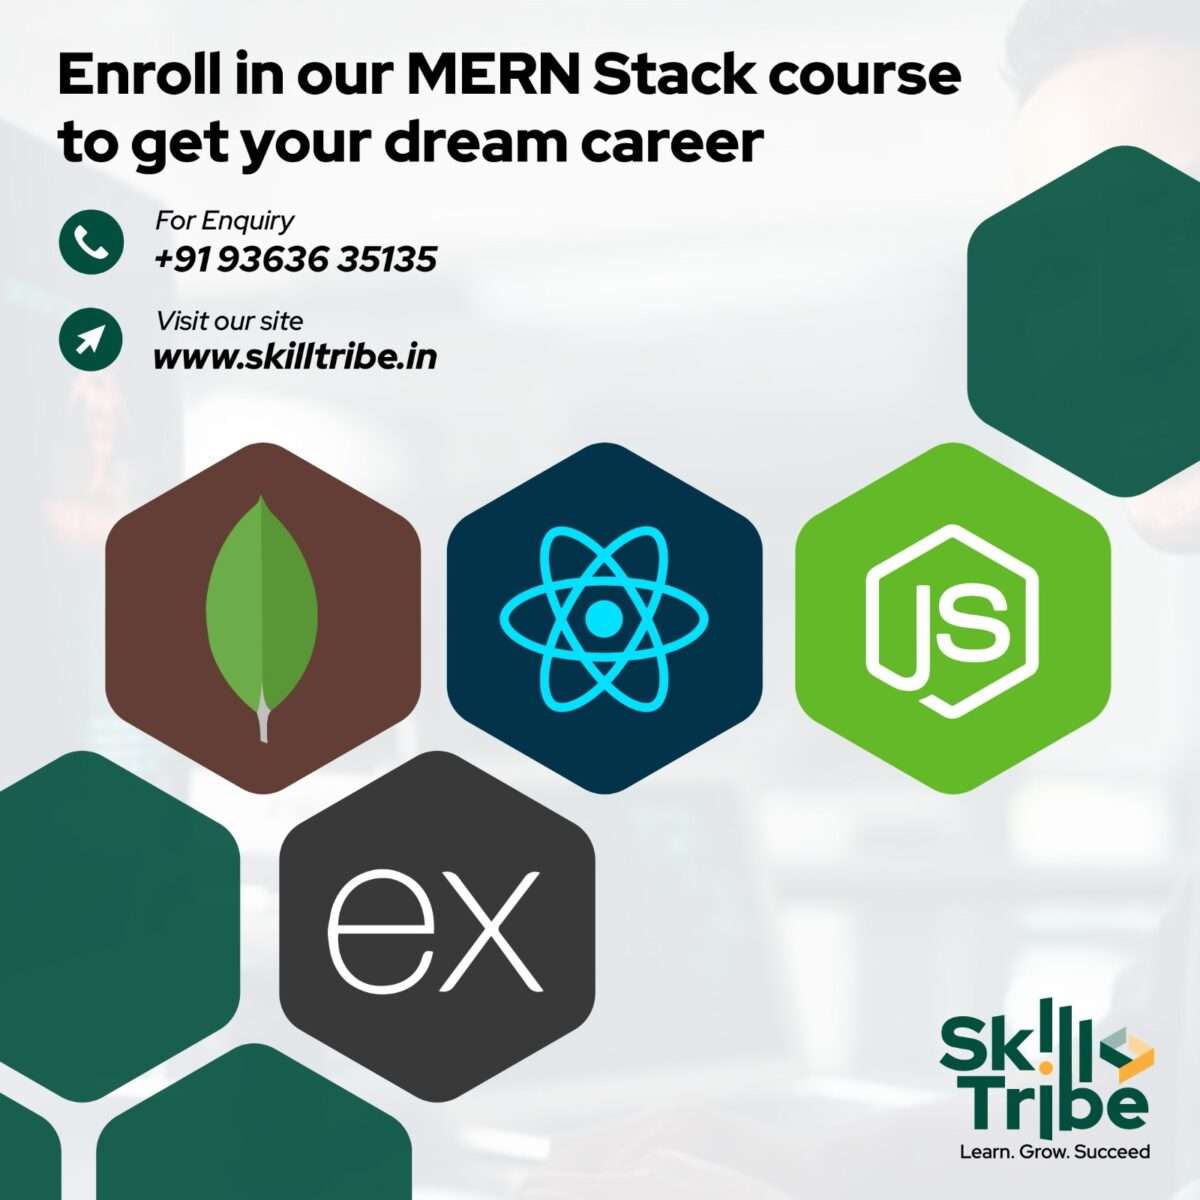 MERN stack course